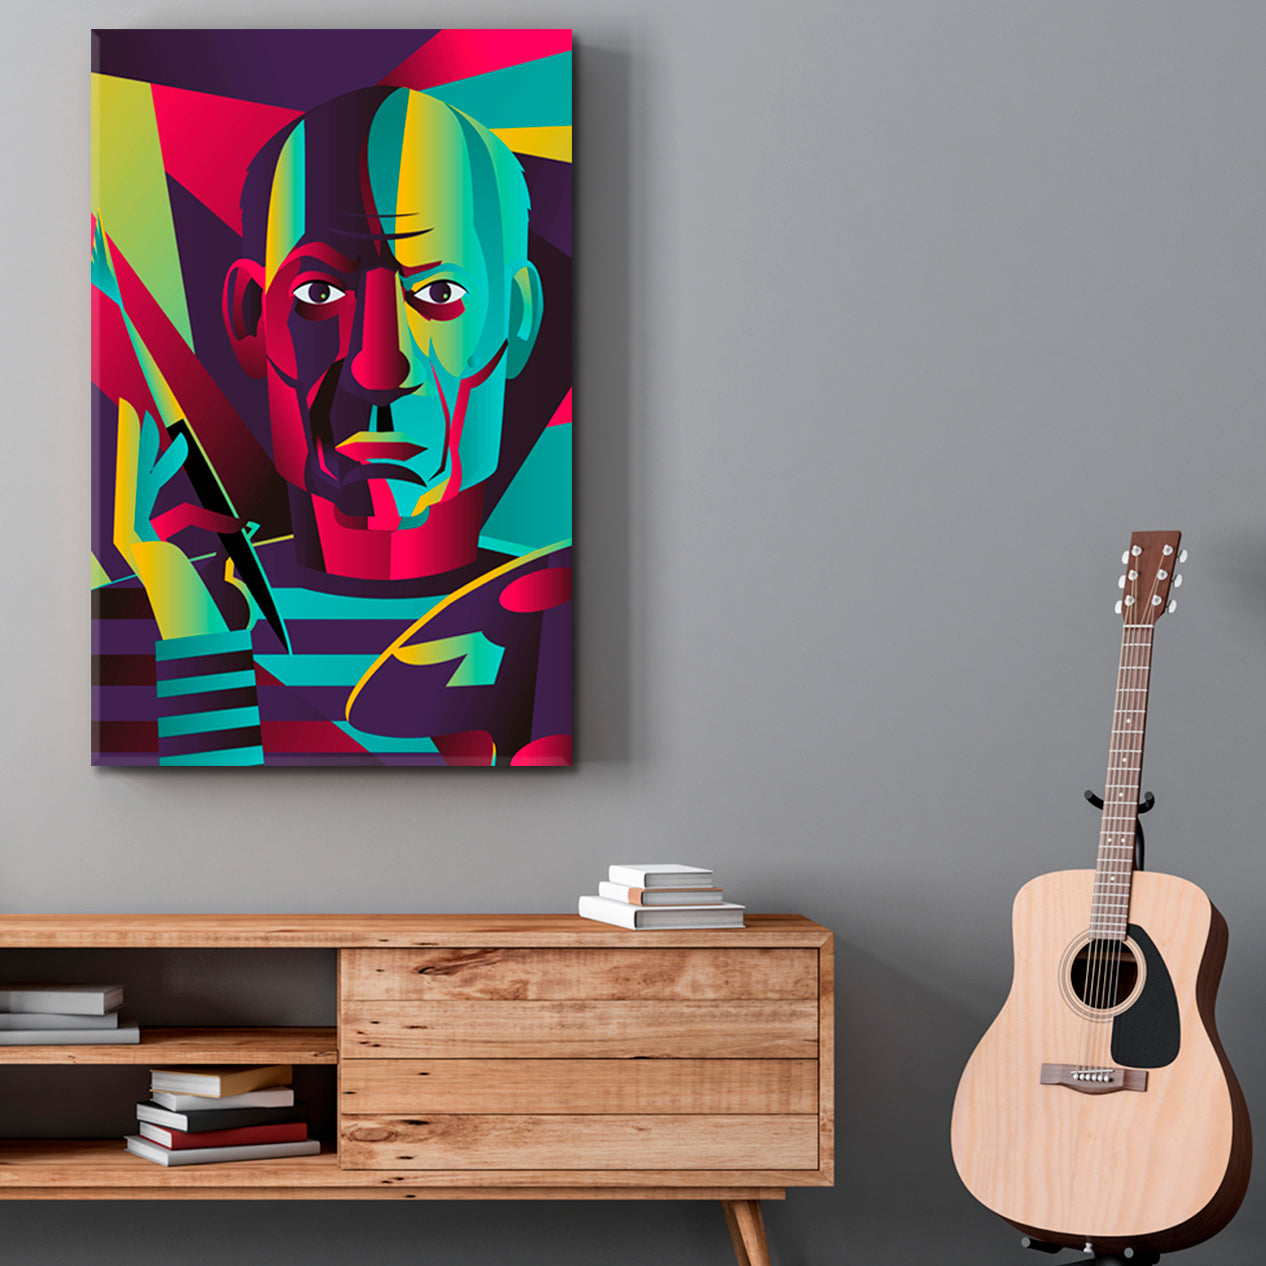 PABLO PICASSO Great Artist Portrait Abstract Colorful Expressionism Cubist Trendy Large Art Print Artesty   